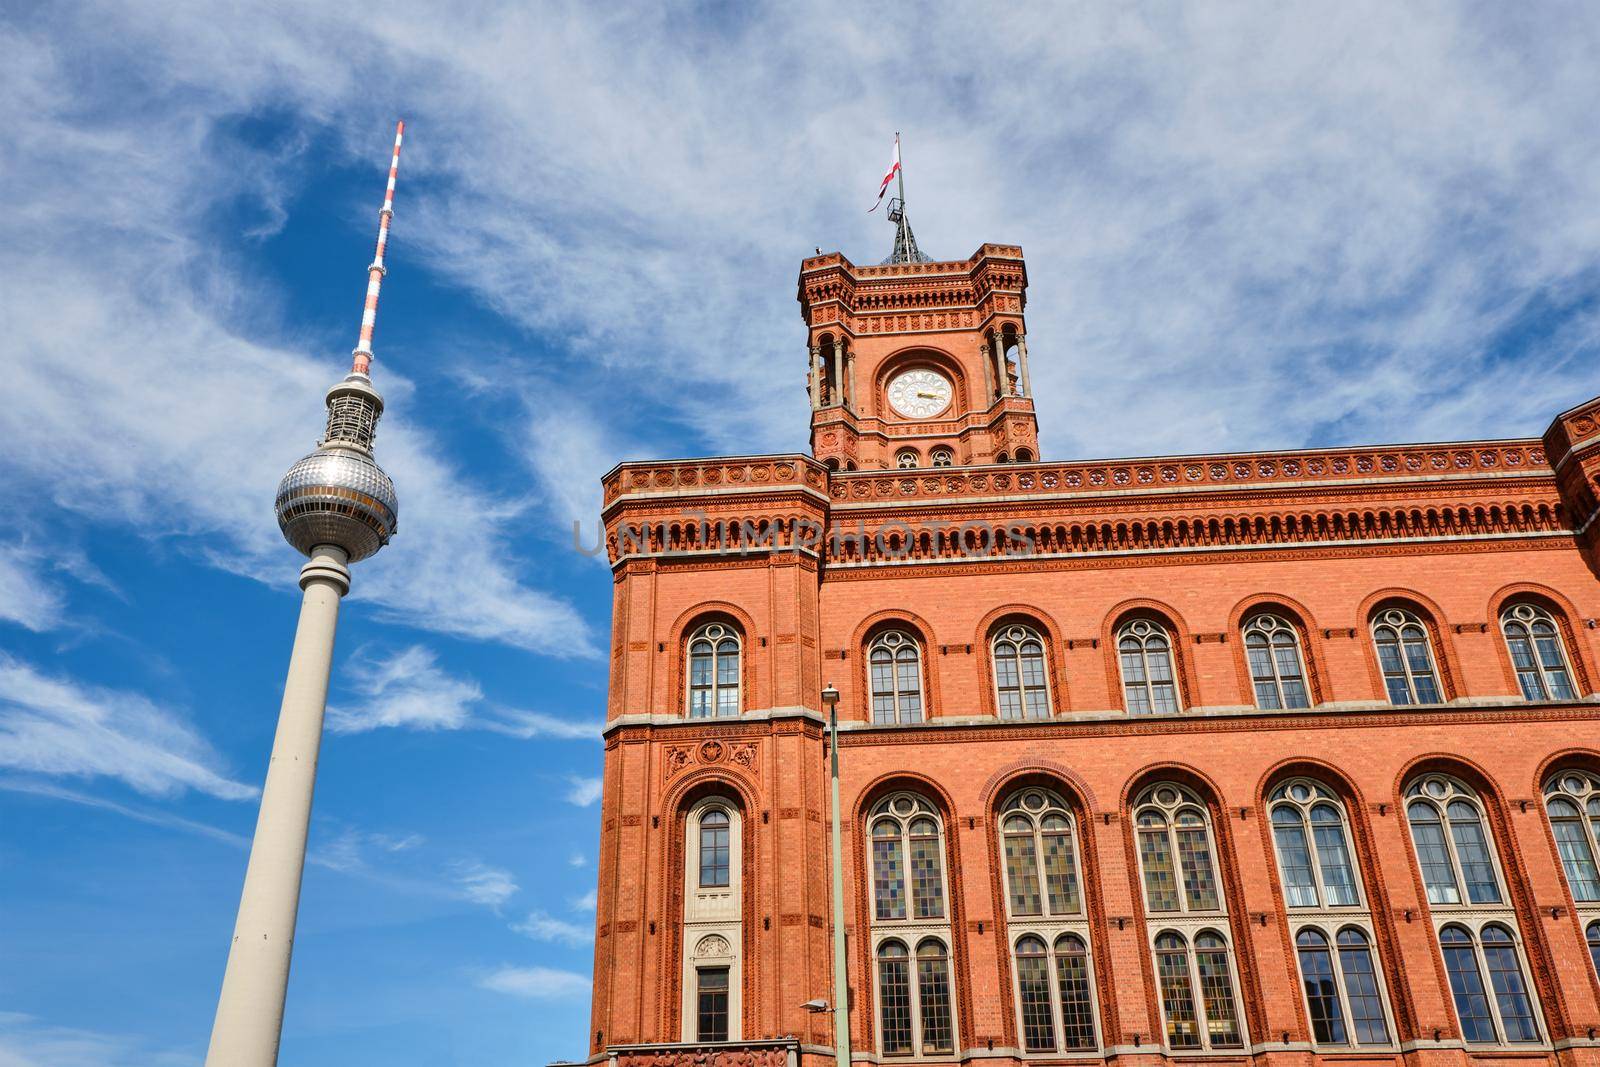 The famous TV Tower and the town hall of Berlin on a sunny day